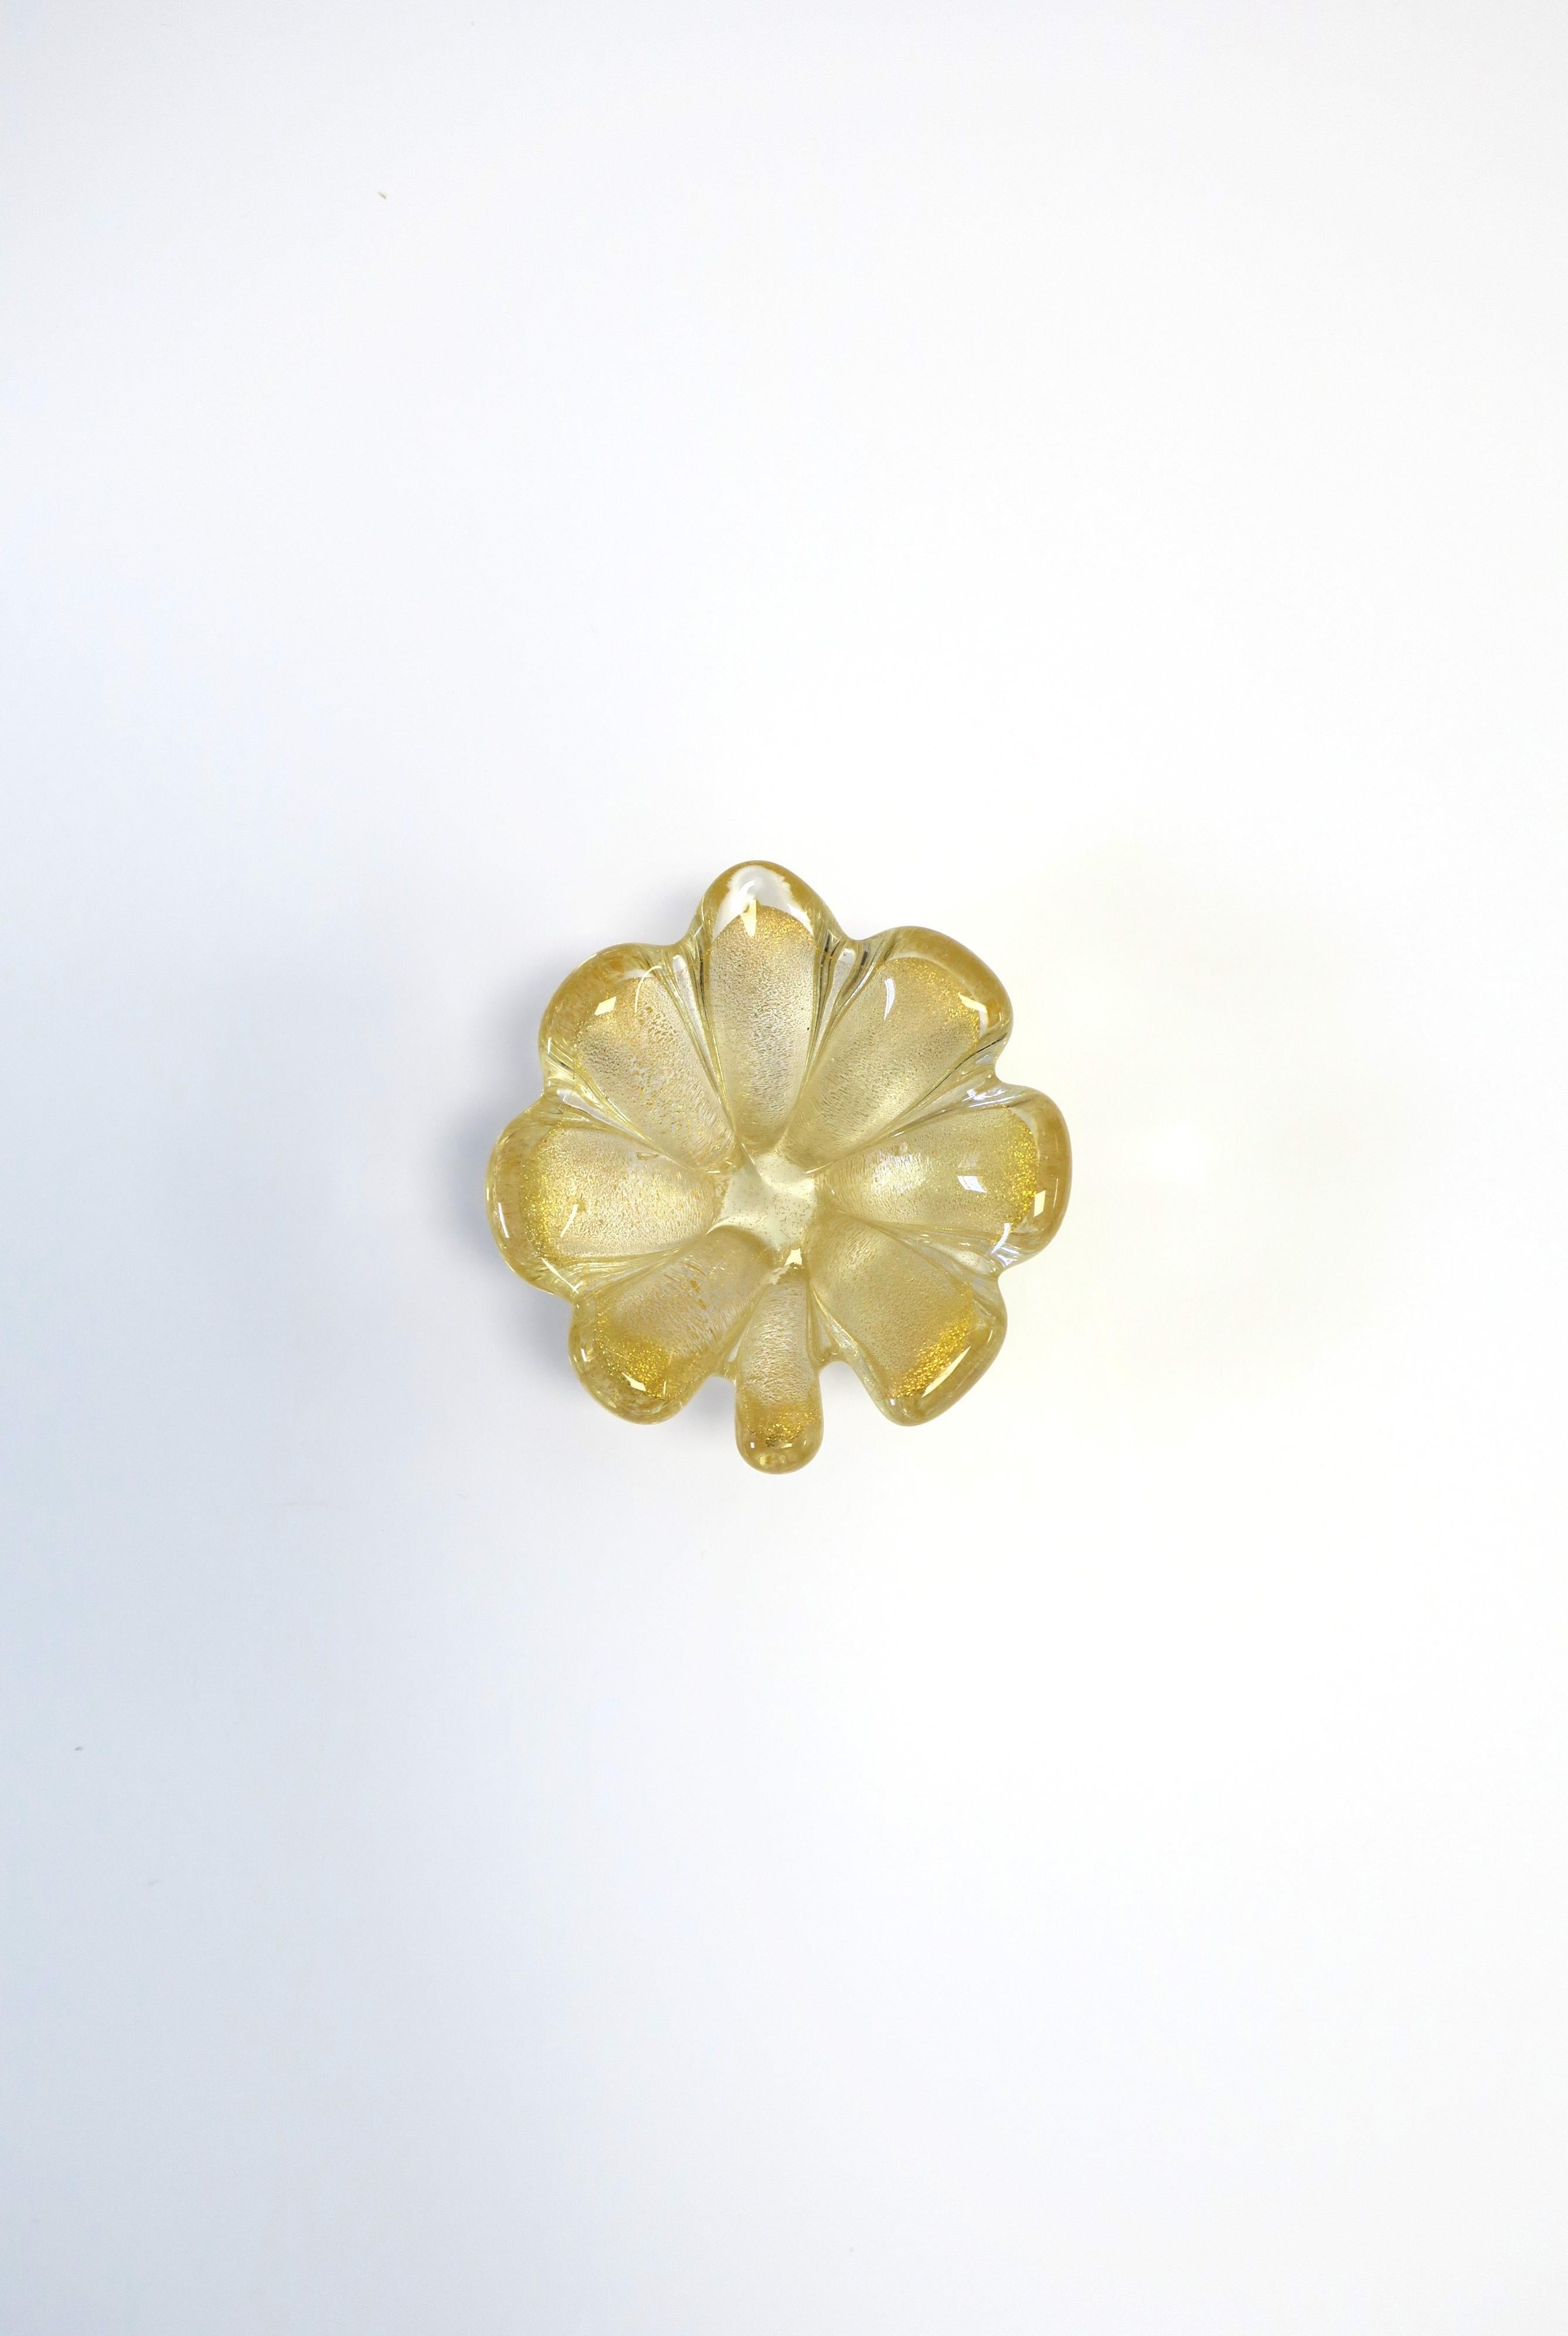 There are two (2) available. Each sold separately as per listing. 

A beautiful Italian Murano transparent/clear and shimmering gold art glass 'flower' jewelry dish in the Organic Modern style, circa late-20th century, Italy. A beautiful small